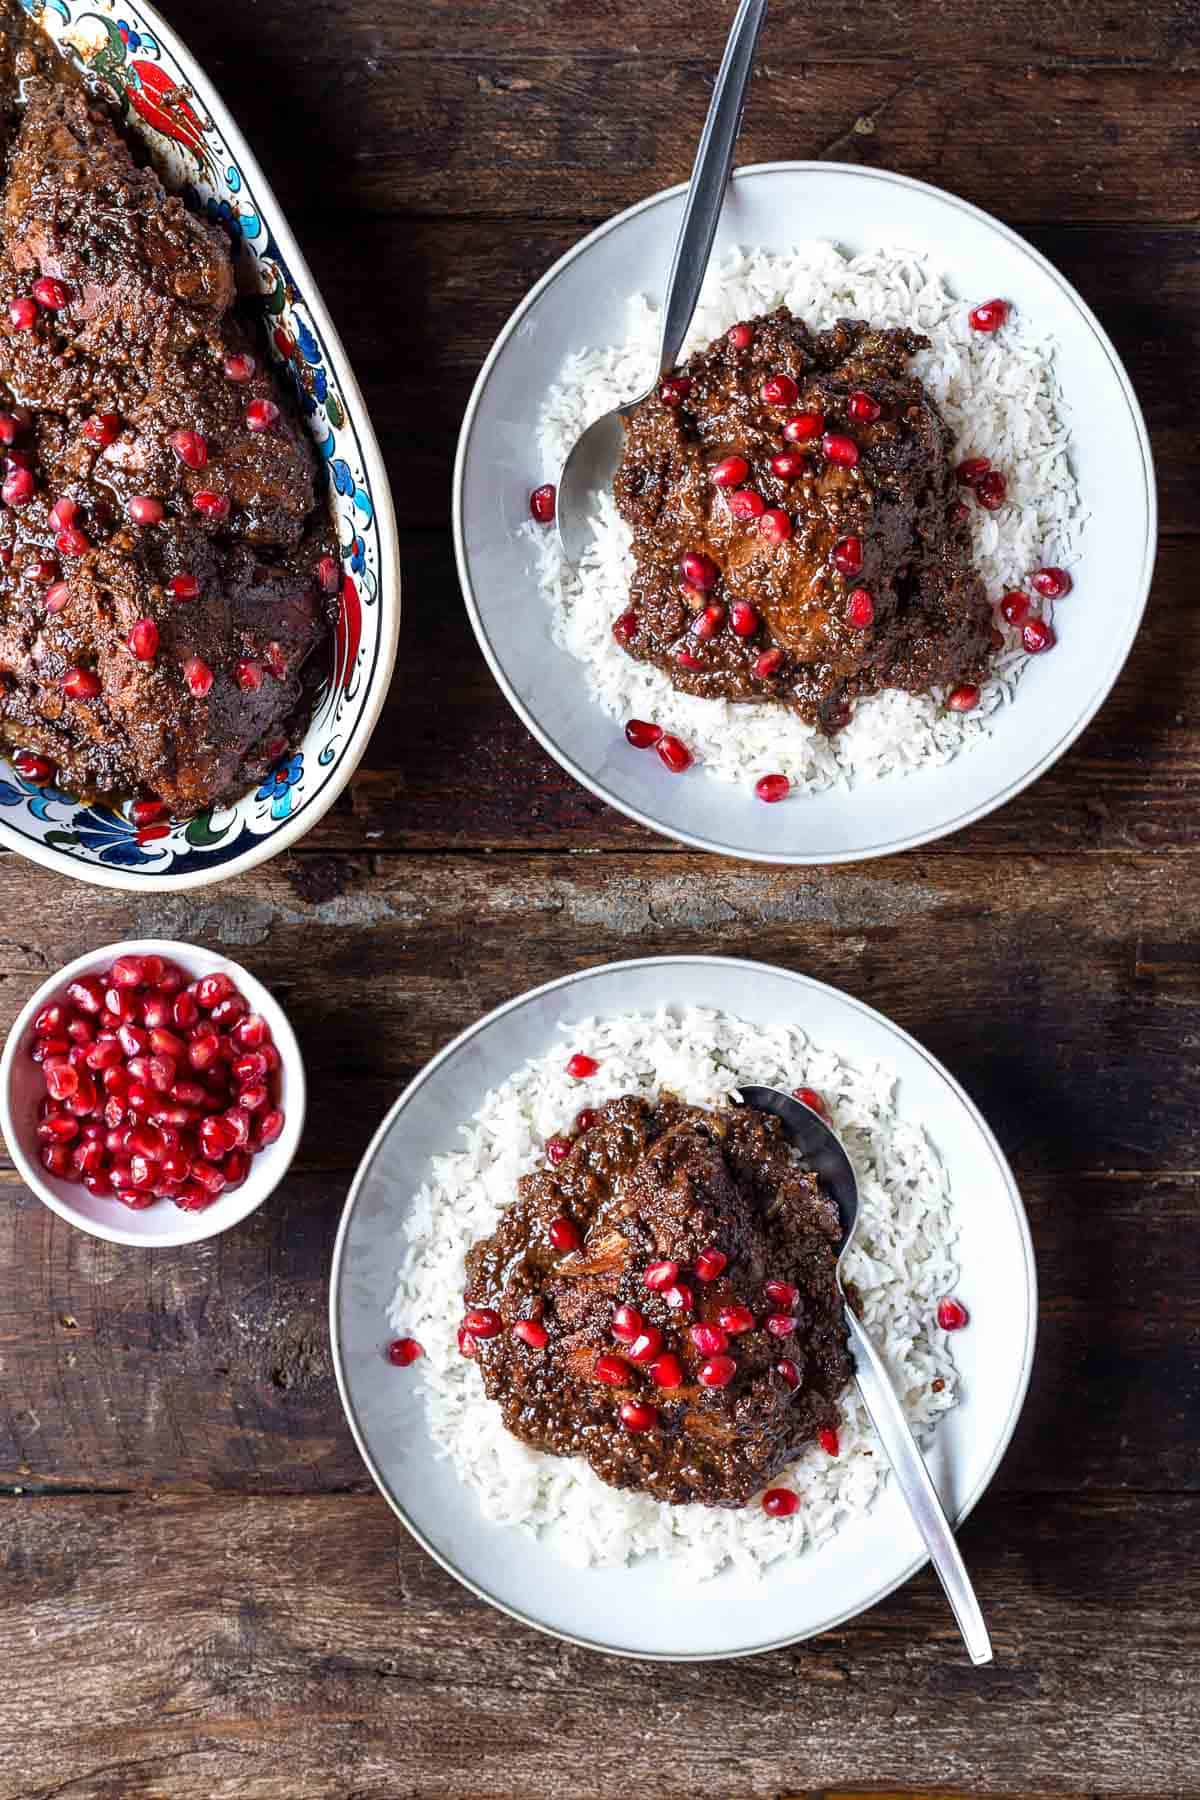 Fesenjan (persian pomegranate and walnut chicken stew) over rice in two bowls with a spoons next to a platter of fesenjan and a bowl of pomegranate seeds.